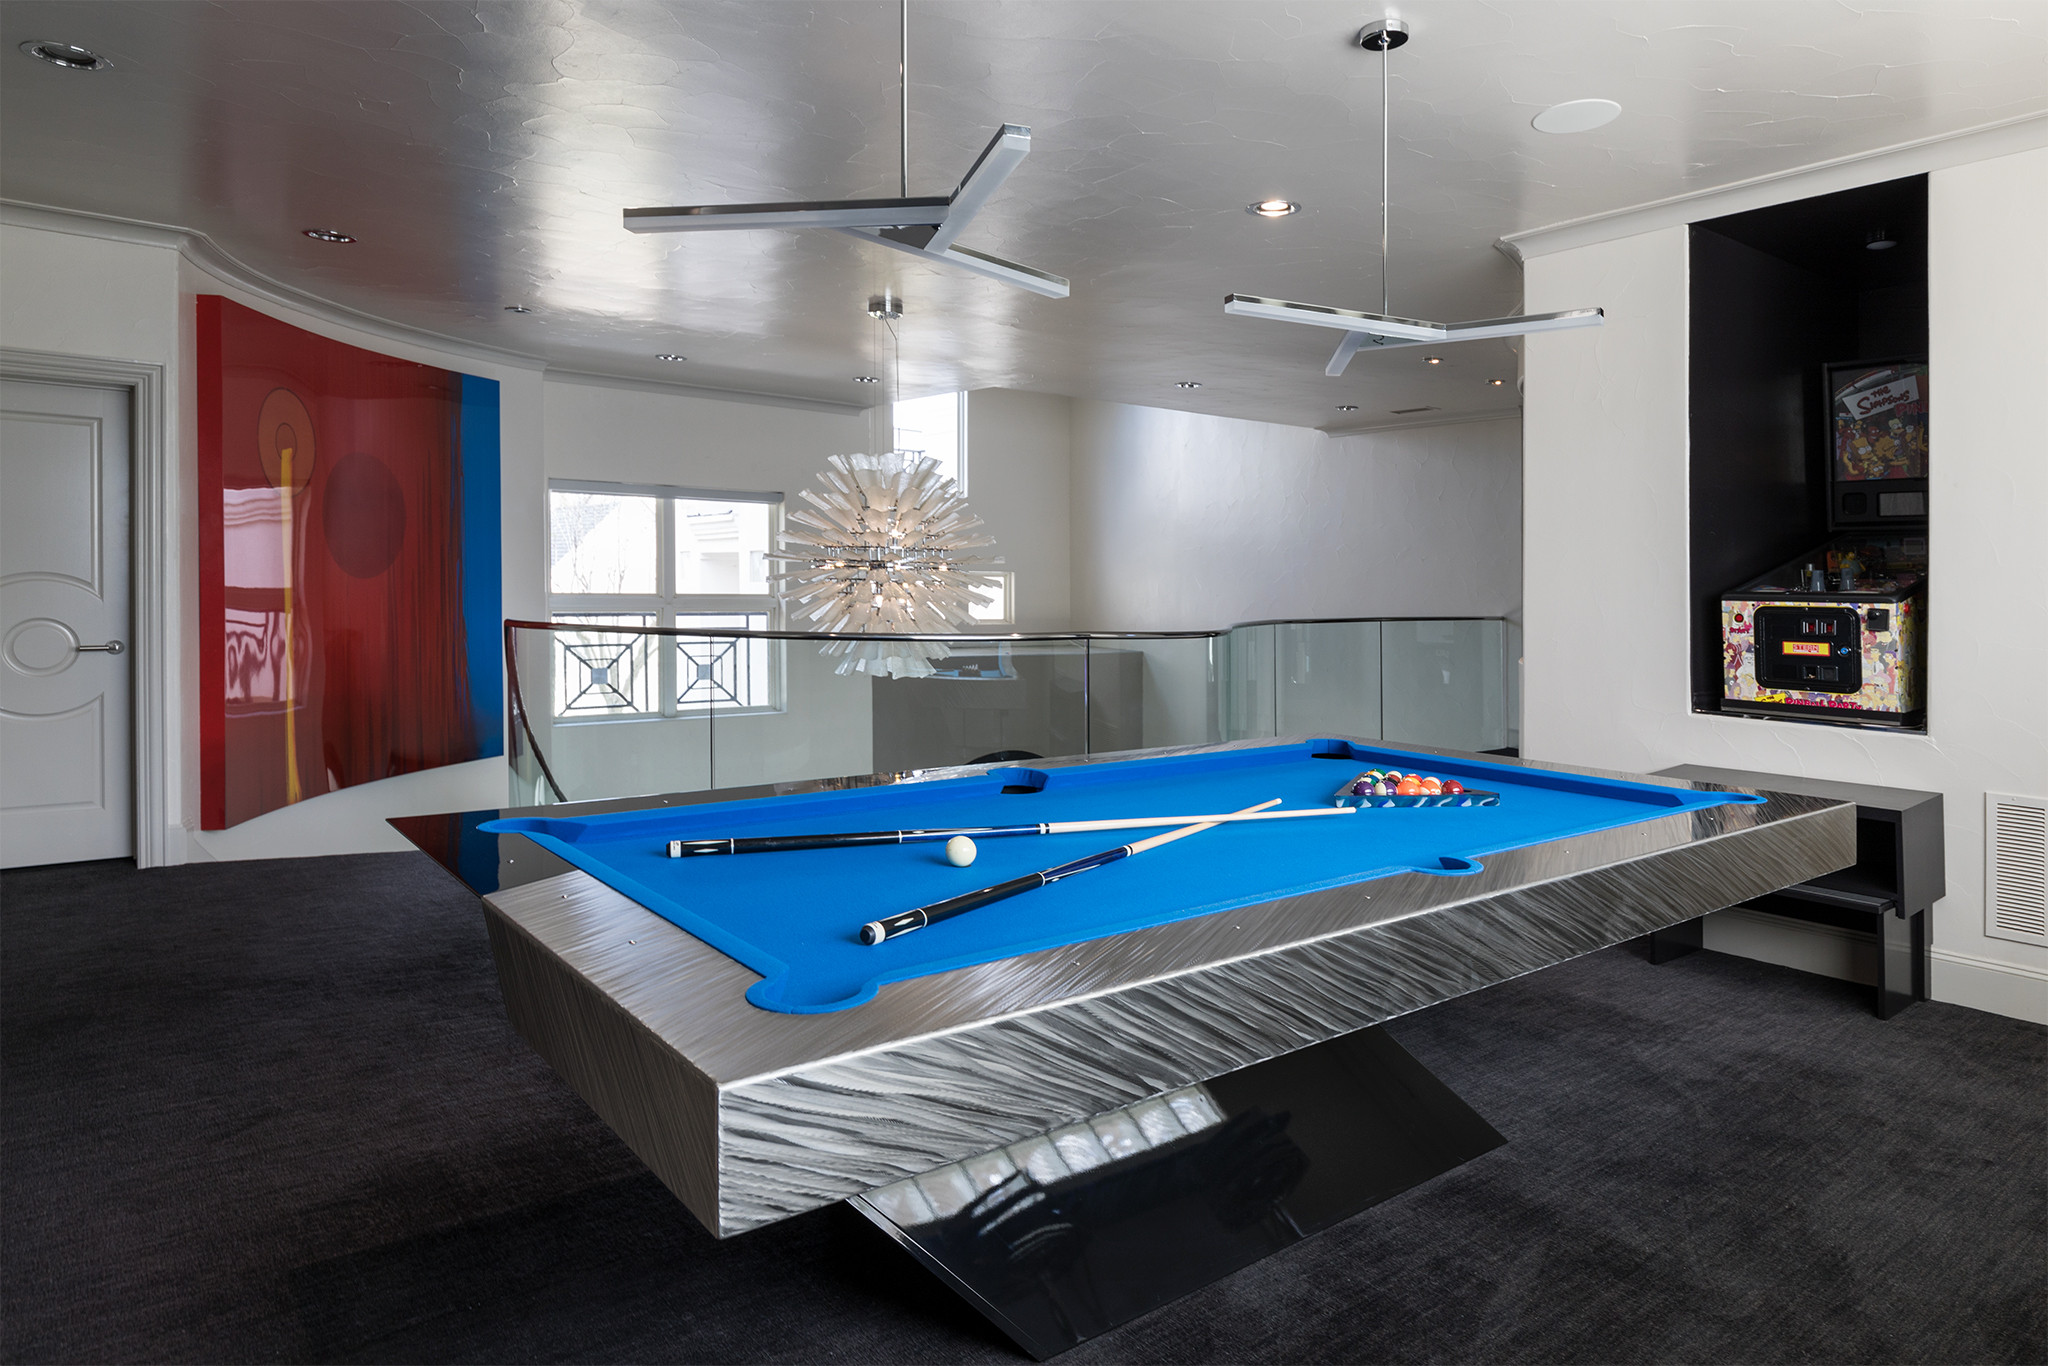 Contemporary Pool Table / Bar